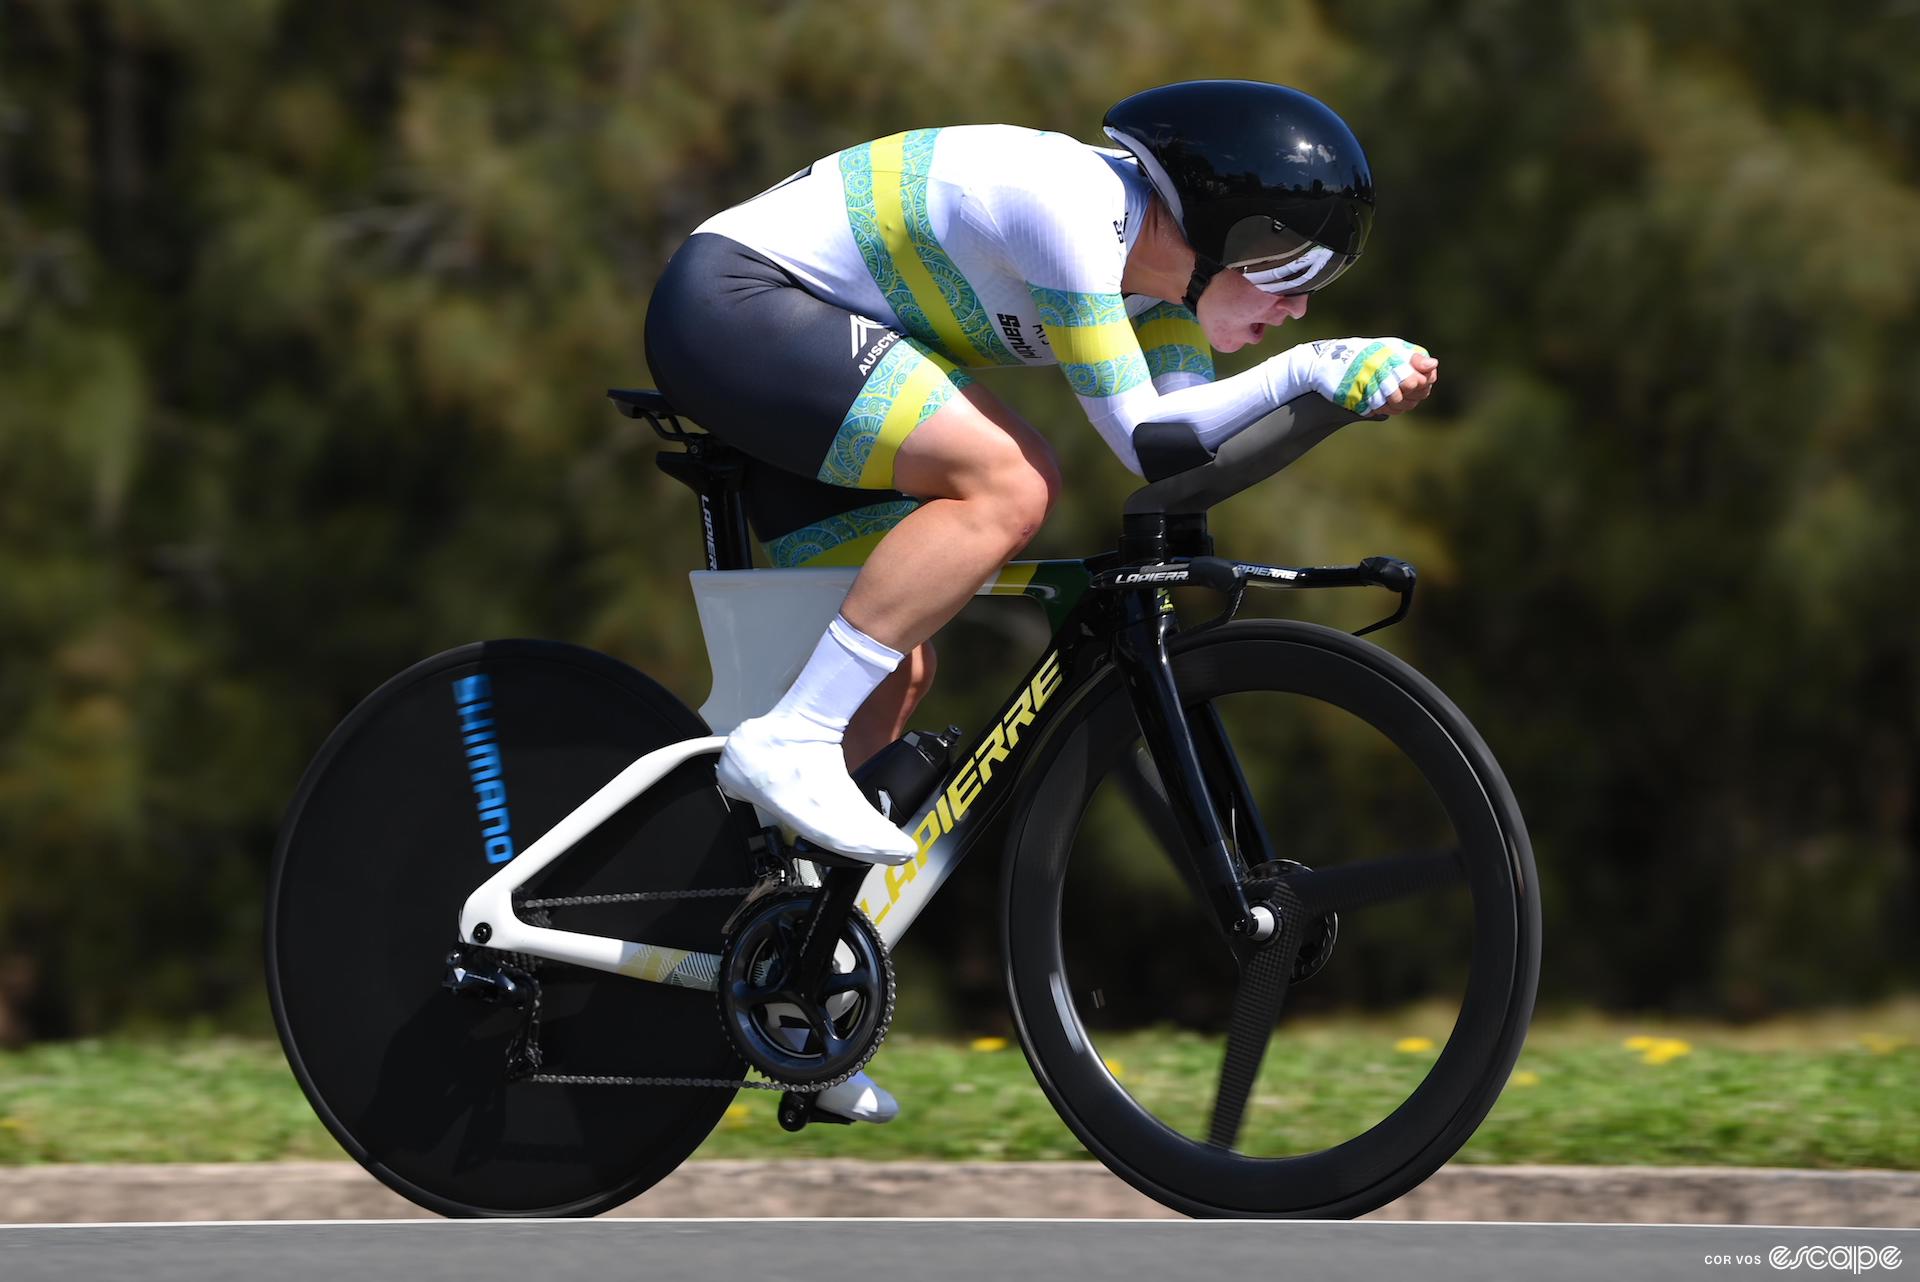 Australian Grace Brown, riding to the silver medal at the 2022 World Time Trial Championships in Wollongong, Australia.